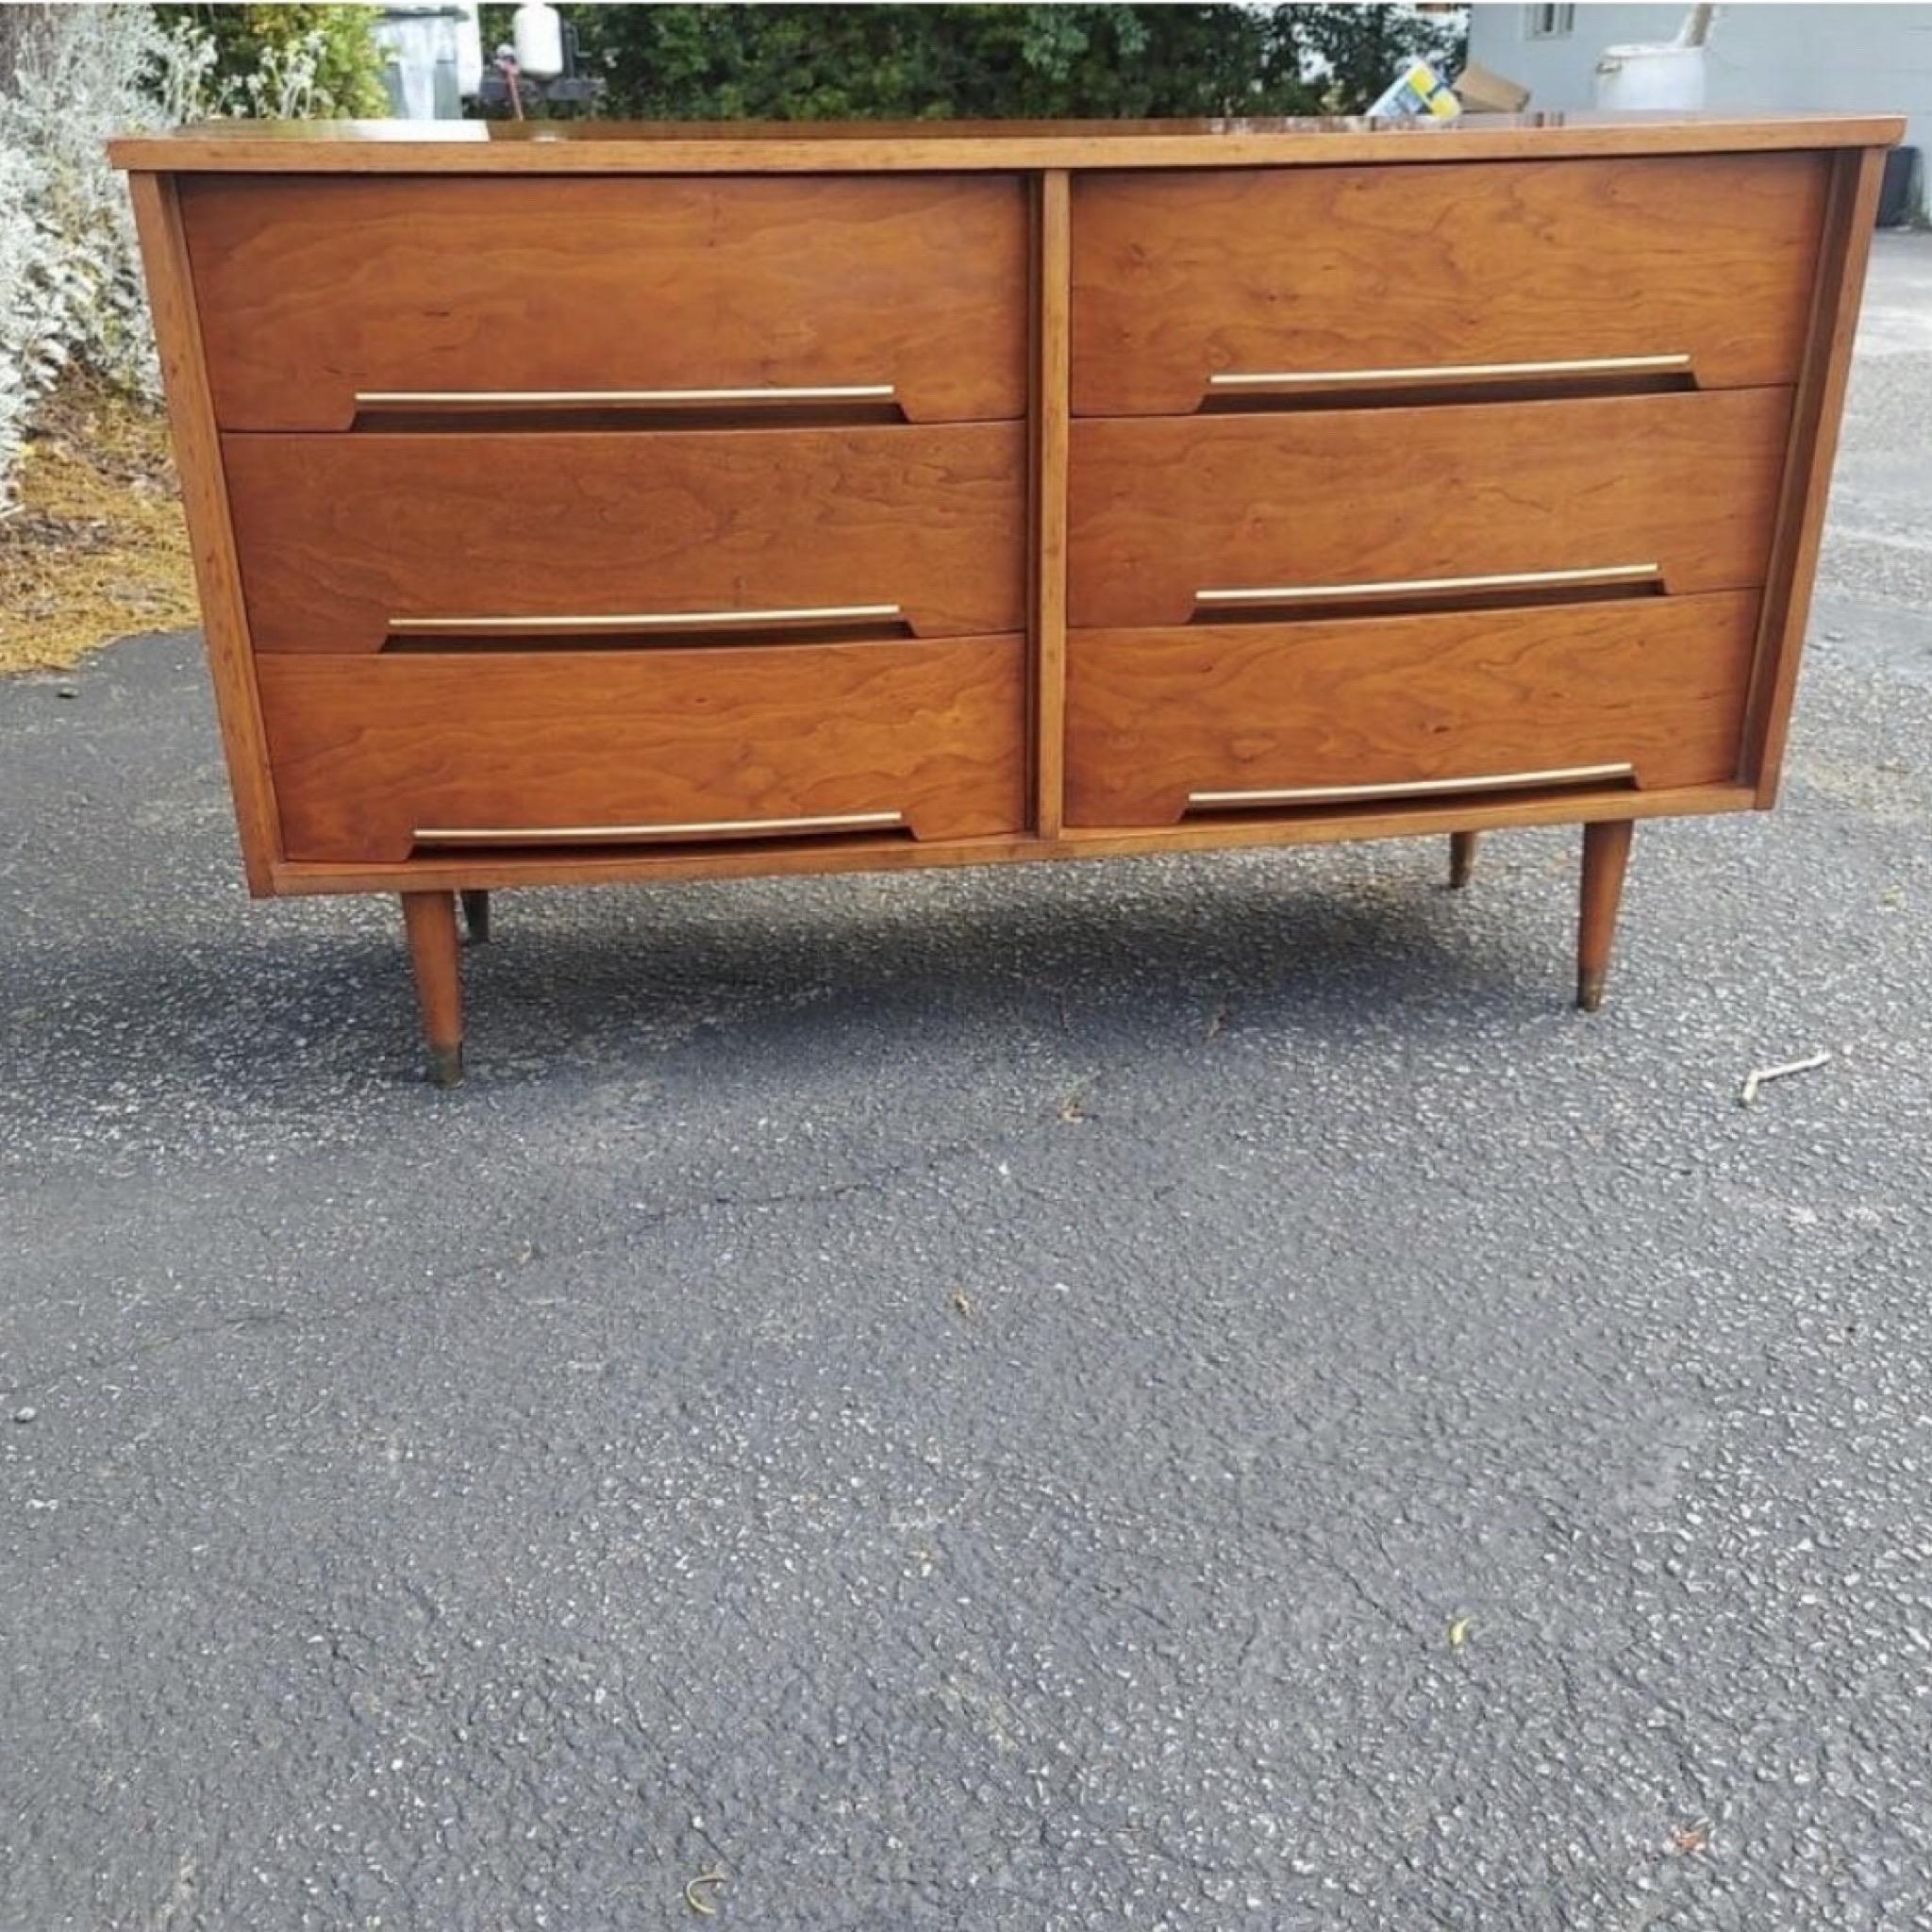 This vintage modern sturdy walnut dresser features brass inlays and inset drawer pulls. Its straightforward design and tapered brass-capped legs are sure to fit in any modern home. 
Measurements:
Side to side 54, front to back 18, floor to top 31.